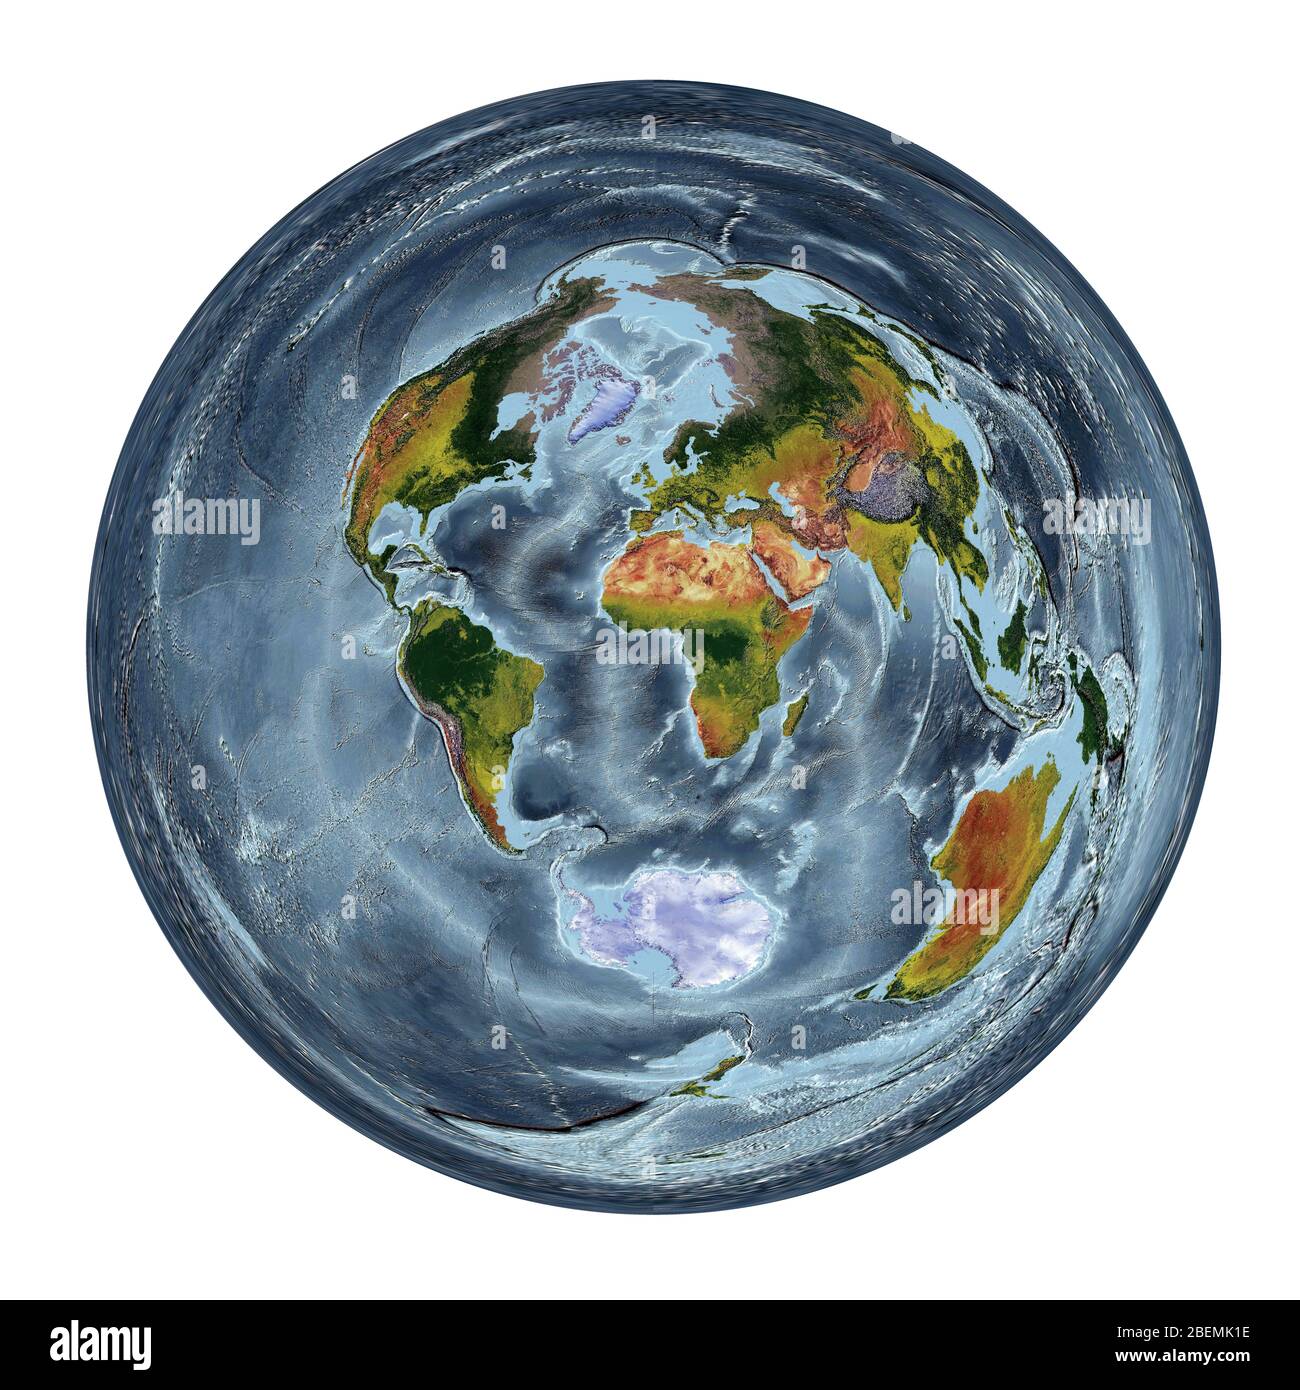 World Map showing land cover and shaded relief with a natural style and a relief shading of the oceans. Azimuthal projection. Stock Photo